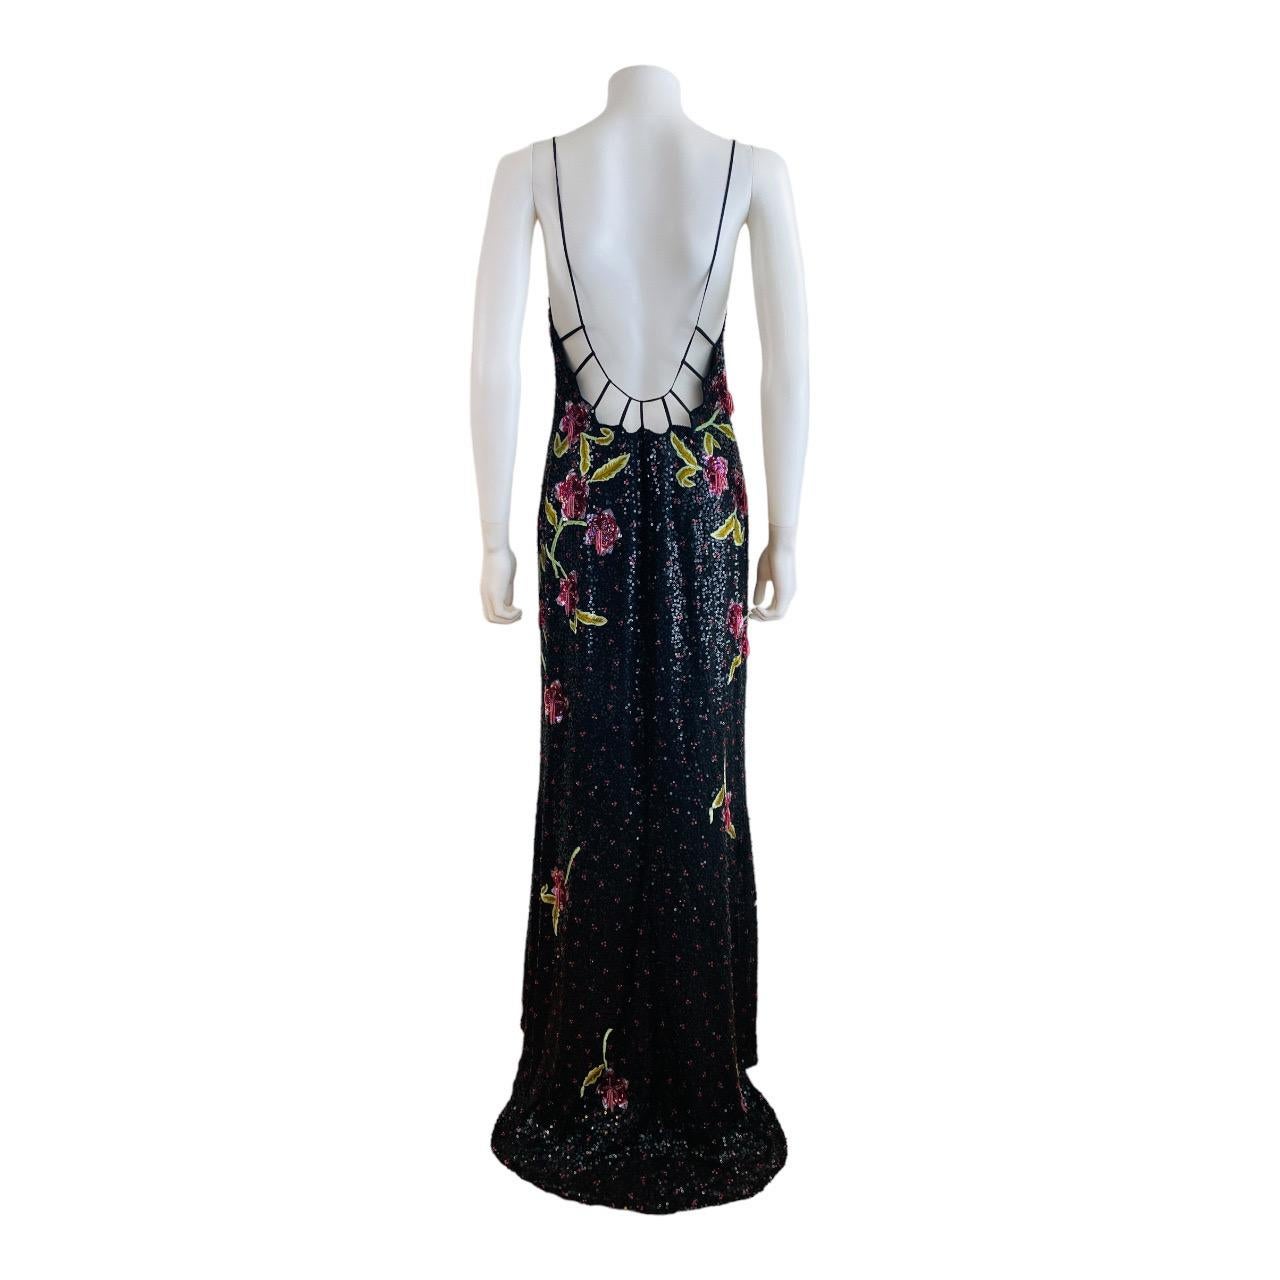 Vintage 2002 Escada Hand Beaded Sequin Floral Maxi Dress Gown Black Pink Flowers For Sale 4